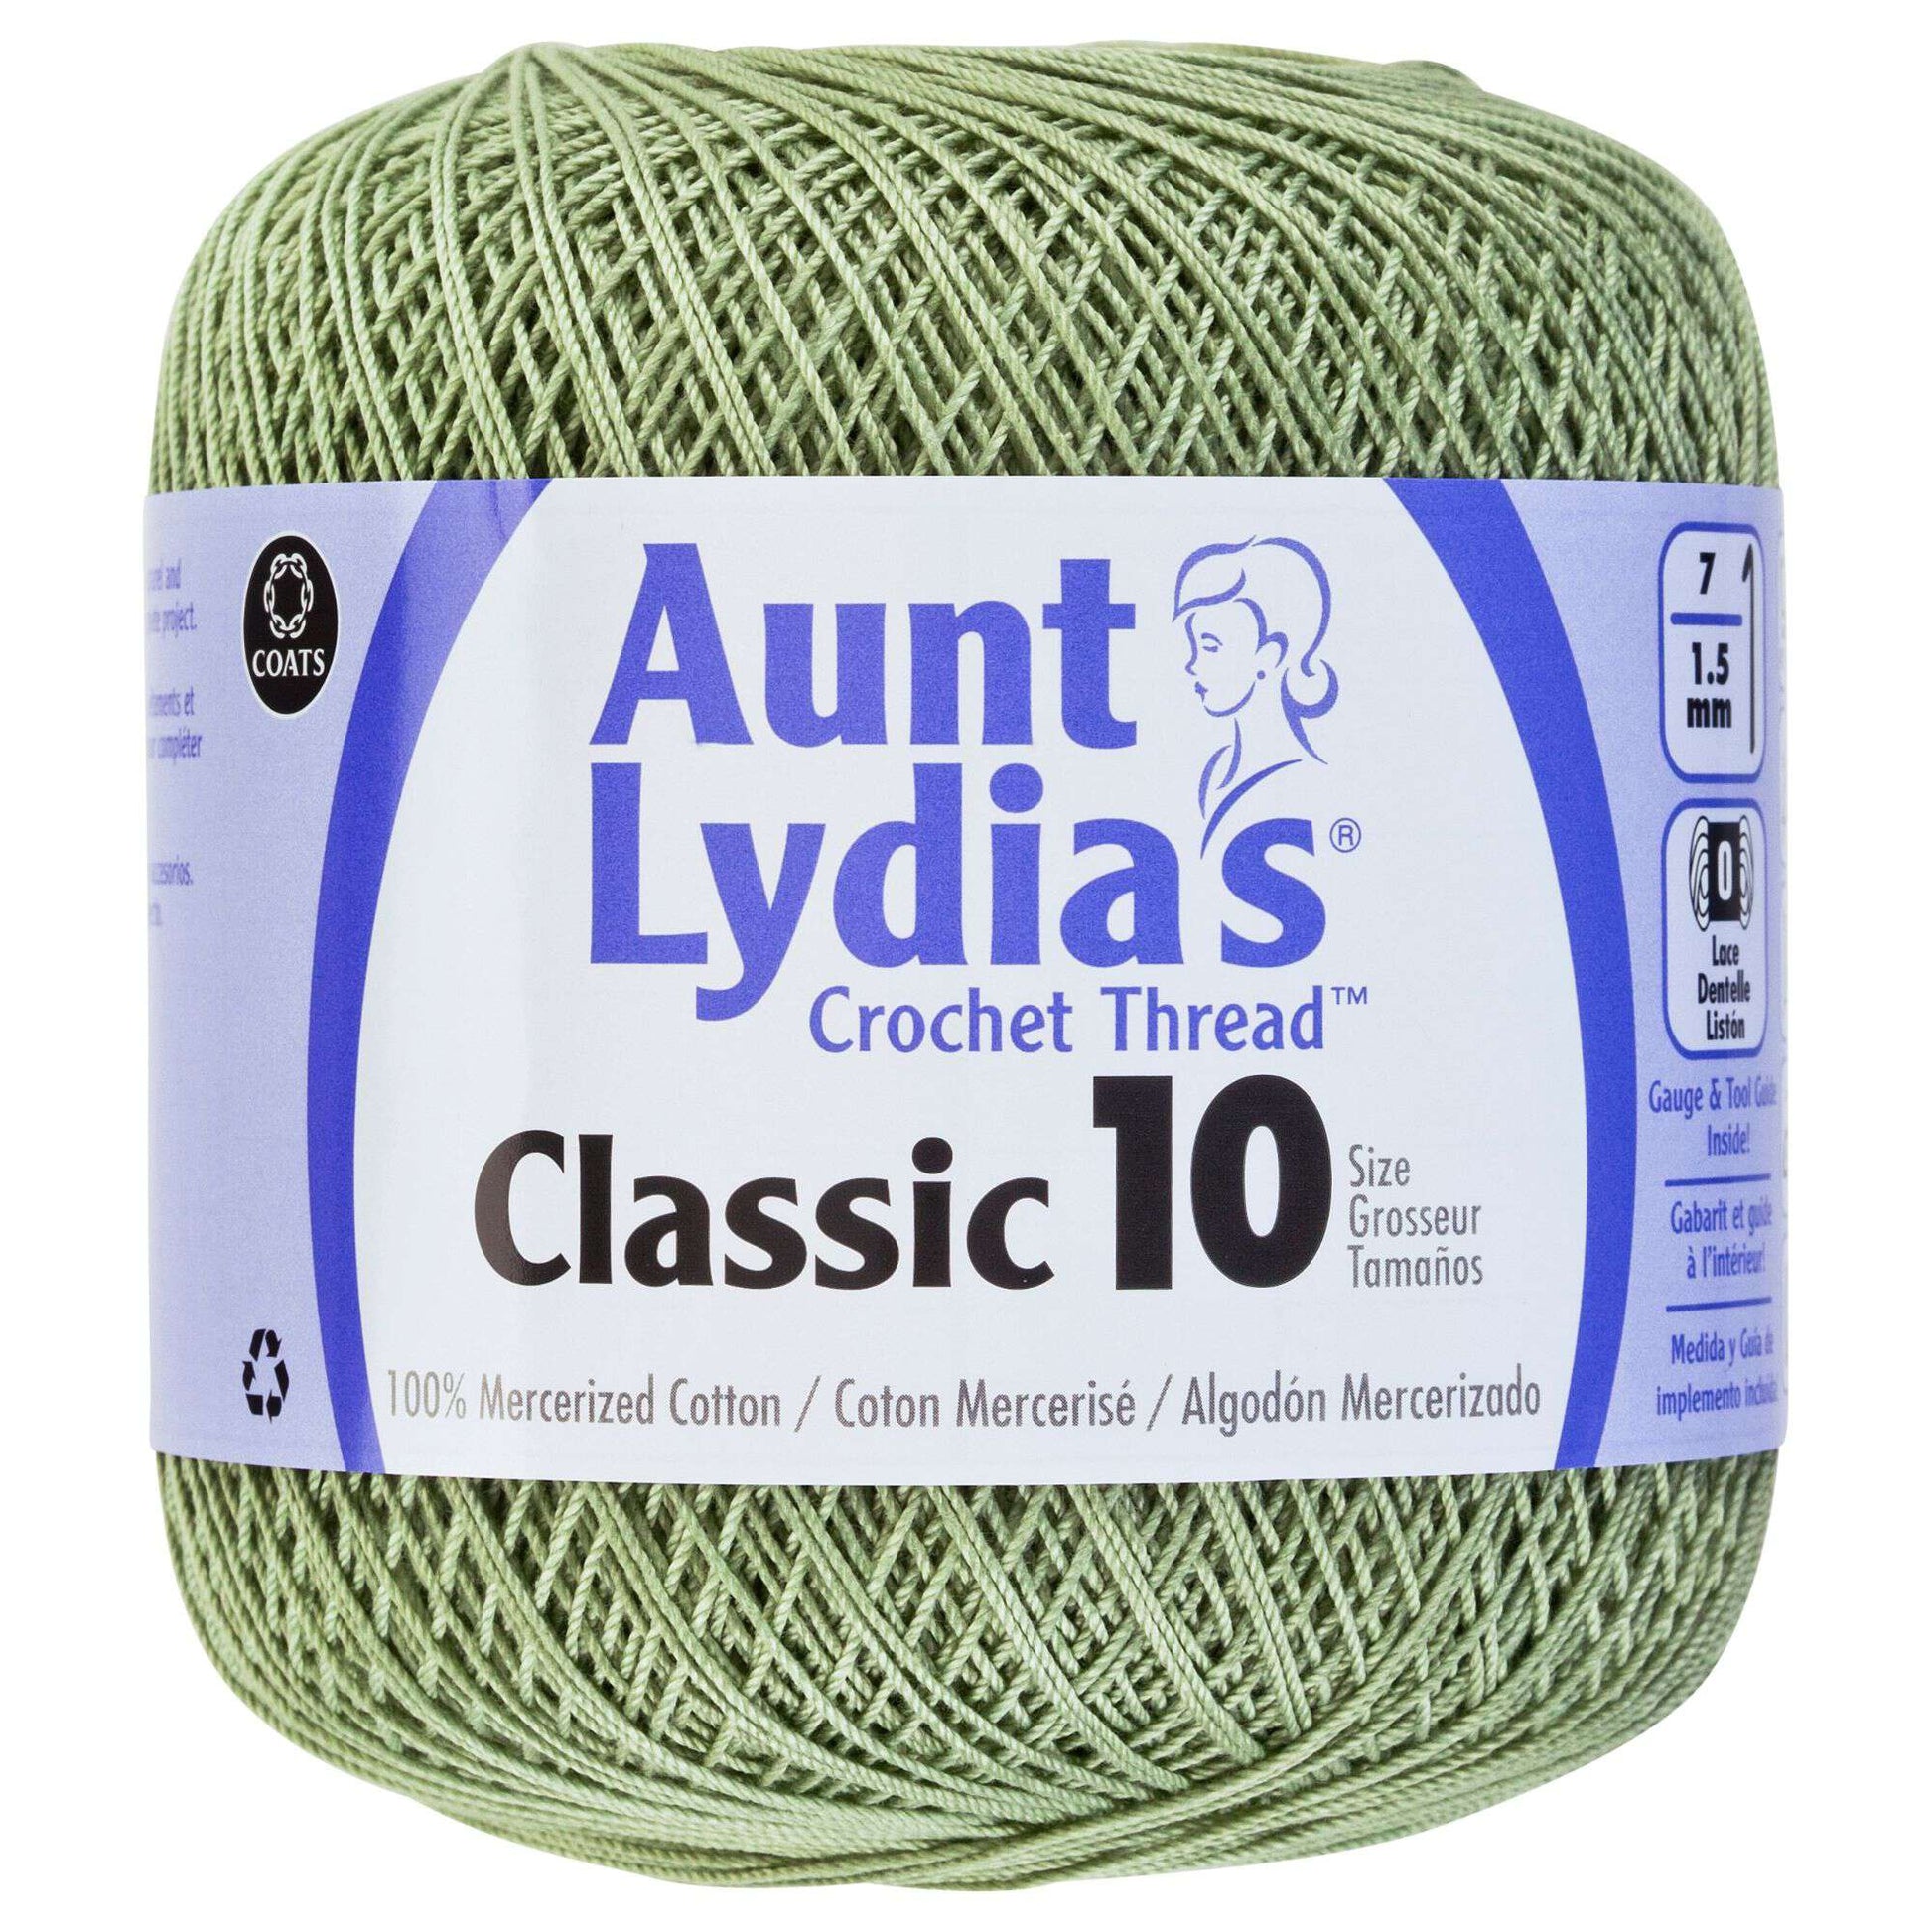 Multipack of 6 - Aunt Lydia's Classic Crochet Thread Size 10-Blue Hawaii